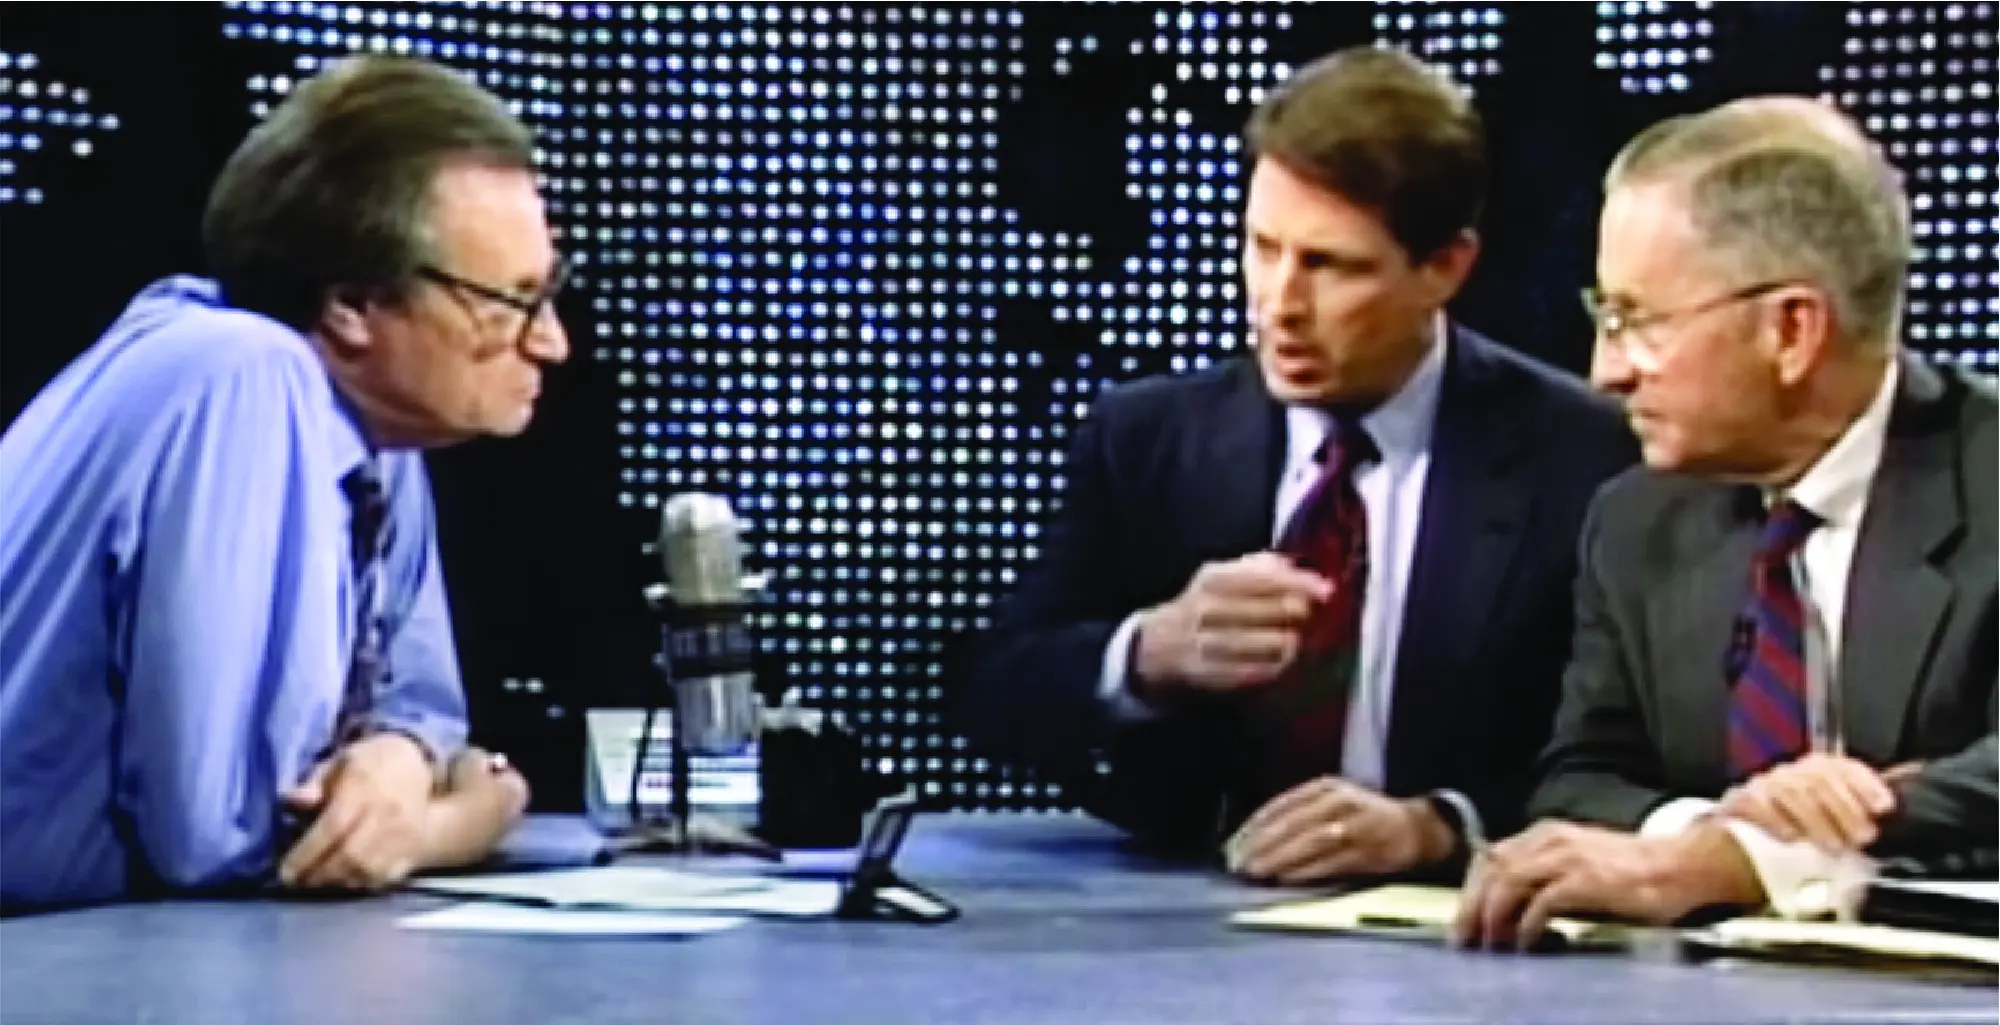 The debate pictured live on Larry King.